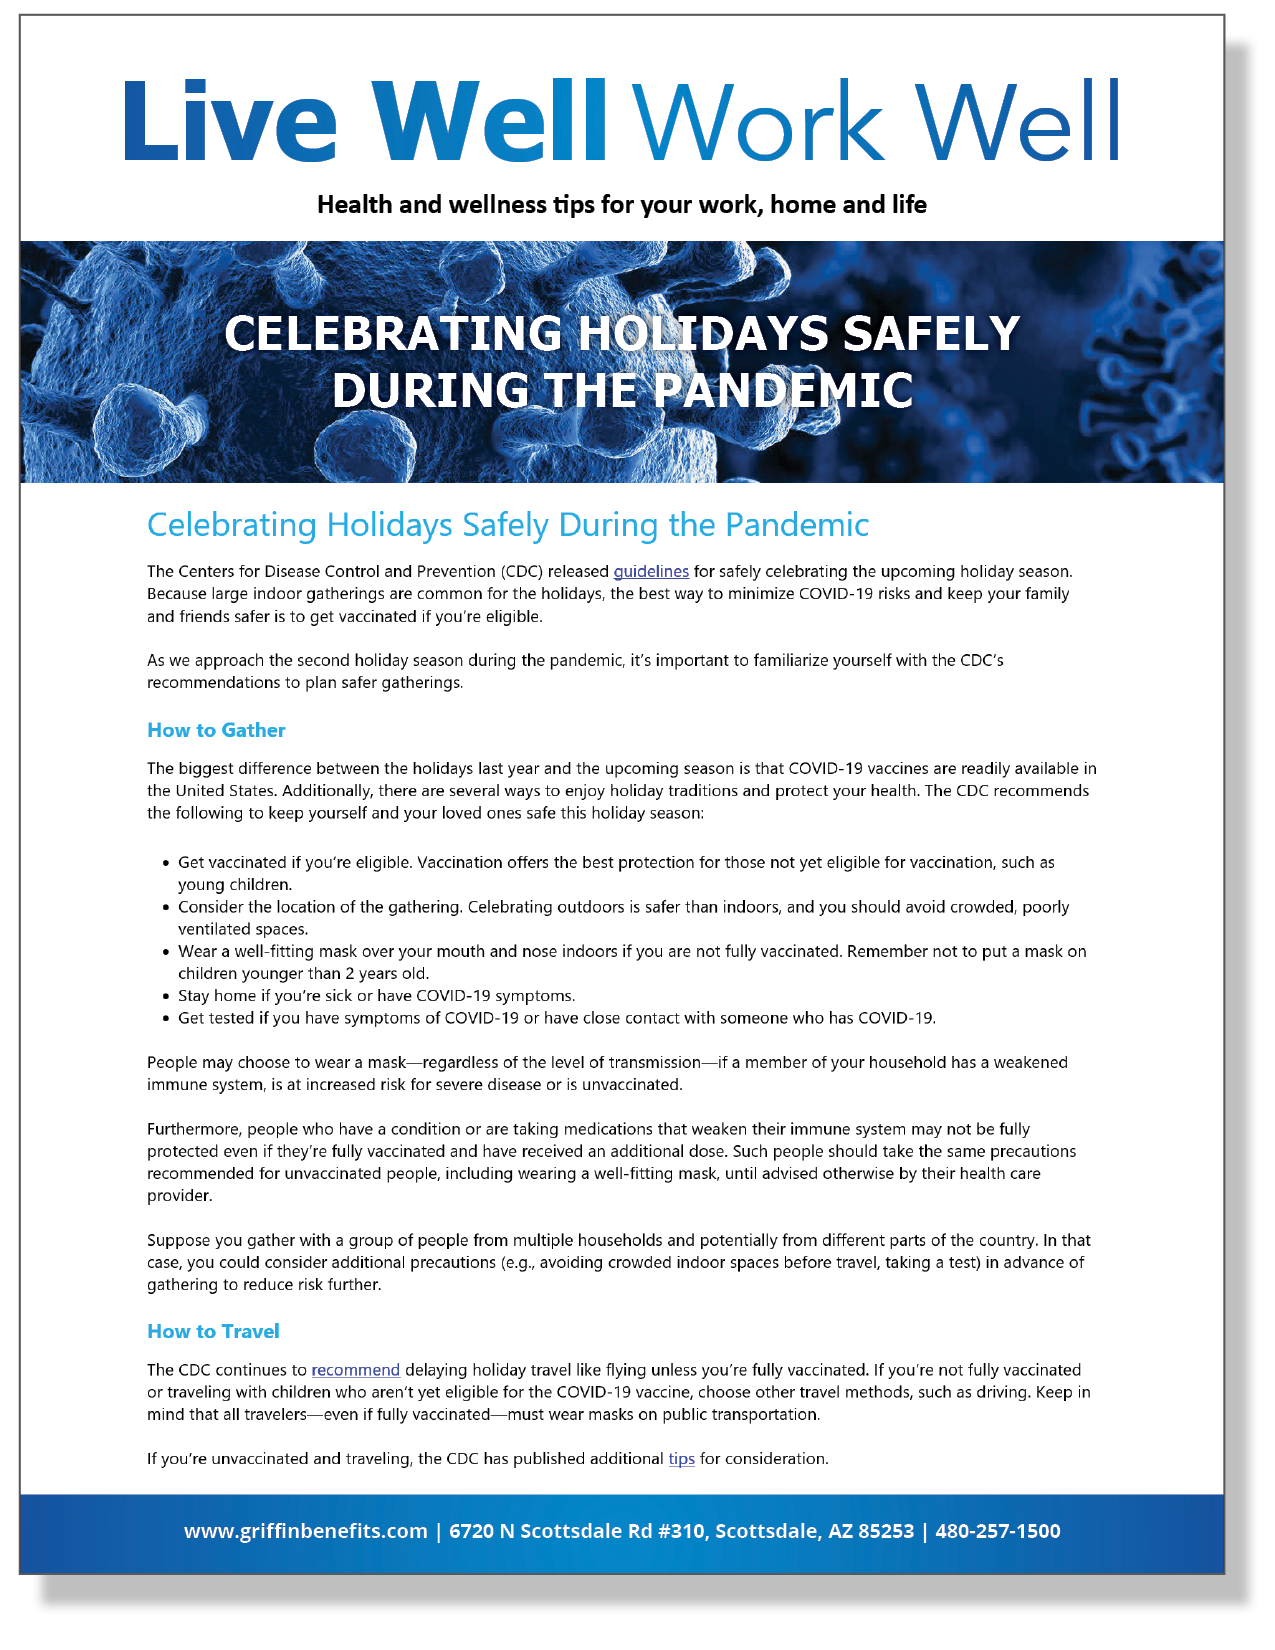 Celebrating Holidays Safely During the Pandemic 10.26